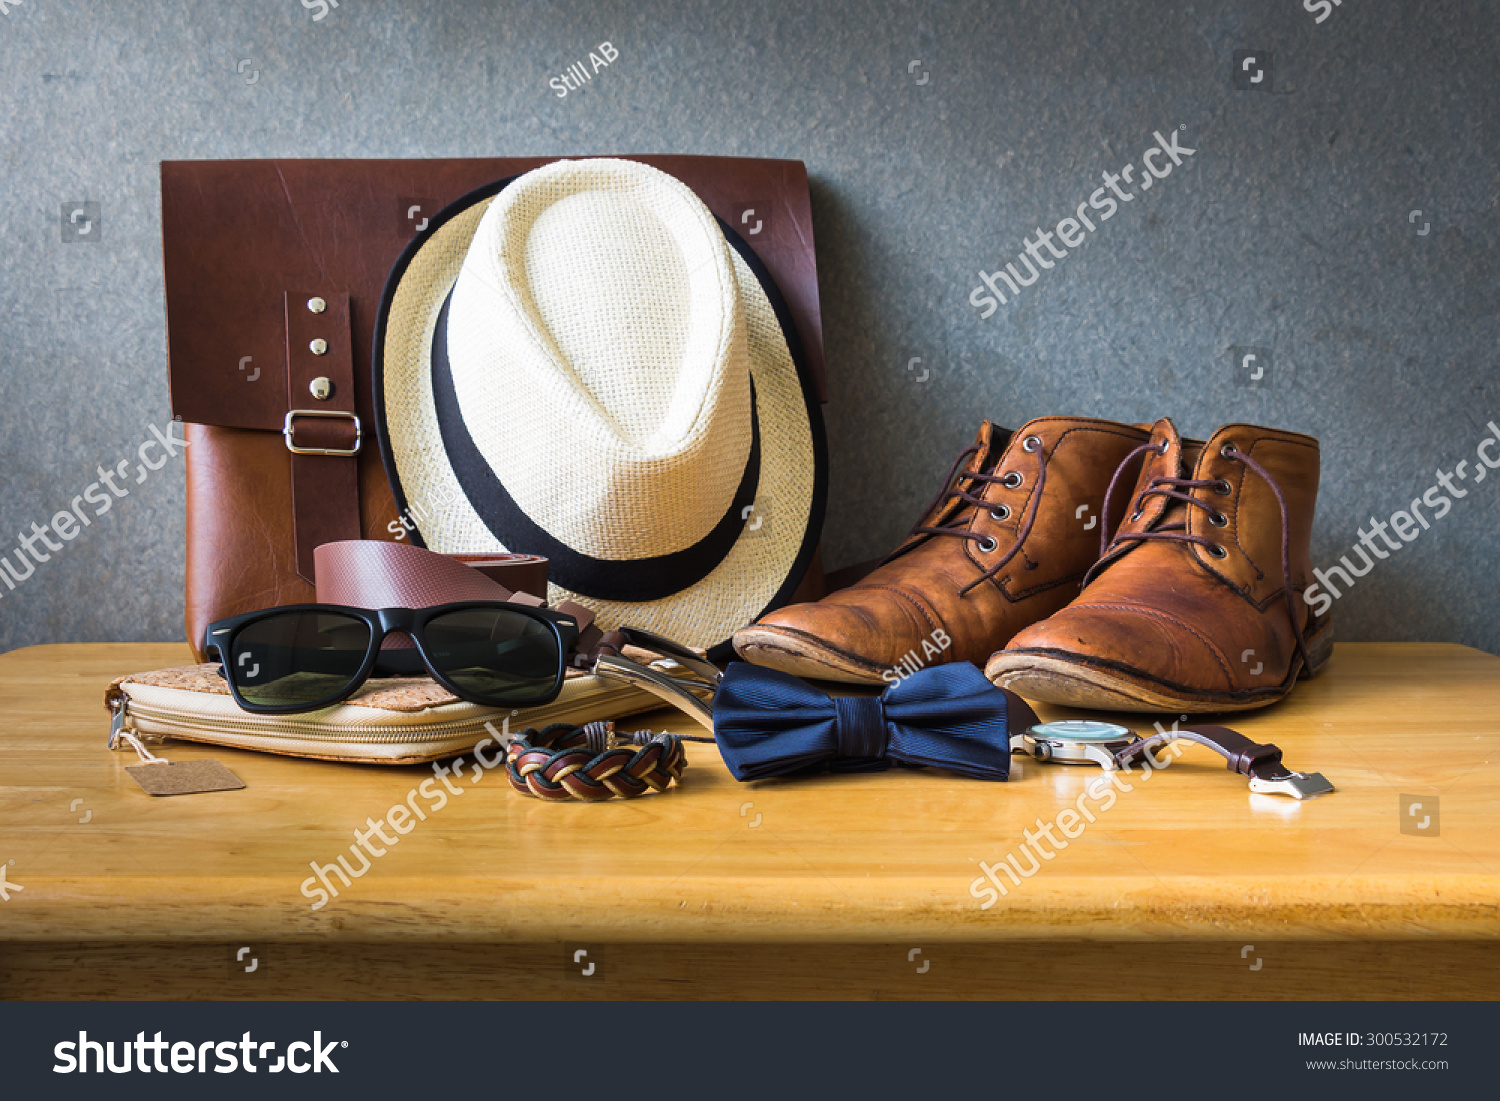 Men's casual outfits on wooden table over wall grunge background #300532172